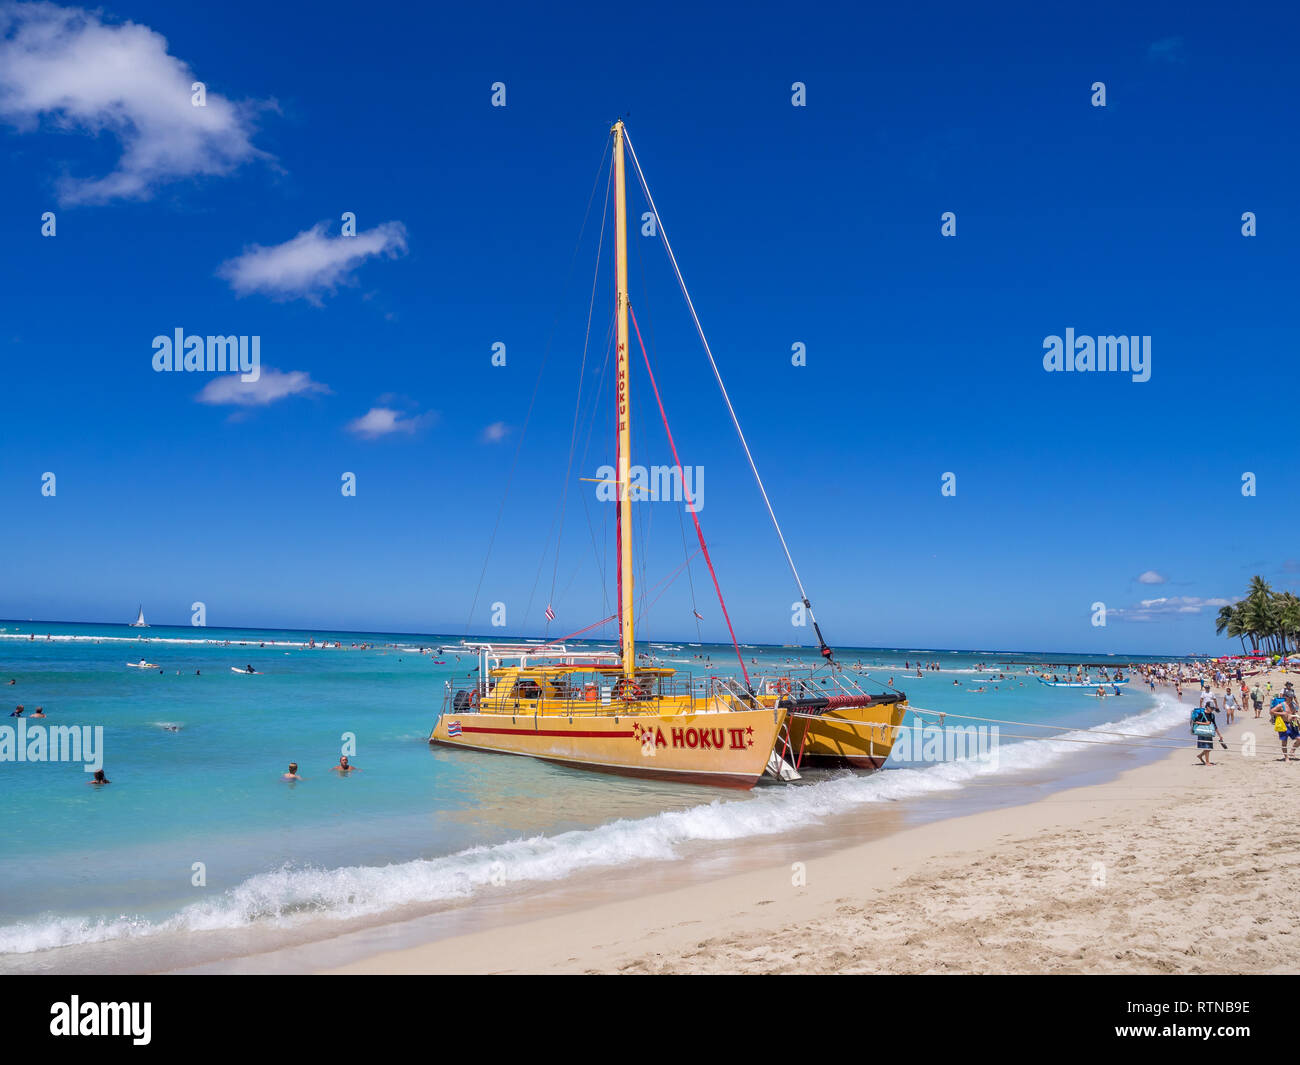 A catamaran waiting for tourists at Waikiki Beach on August 3, 2016 in Honolulu. Catamarans are a popular tourist activity at Waikiki Beach and offer Stock Photo